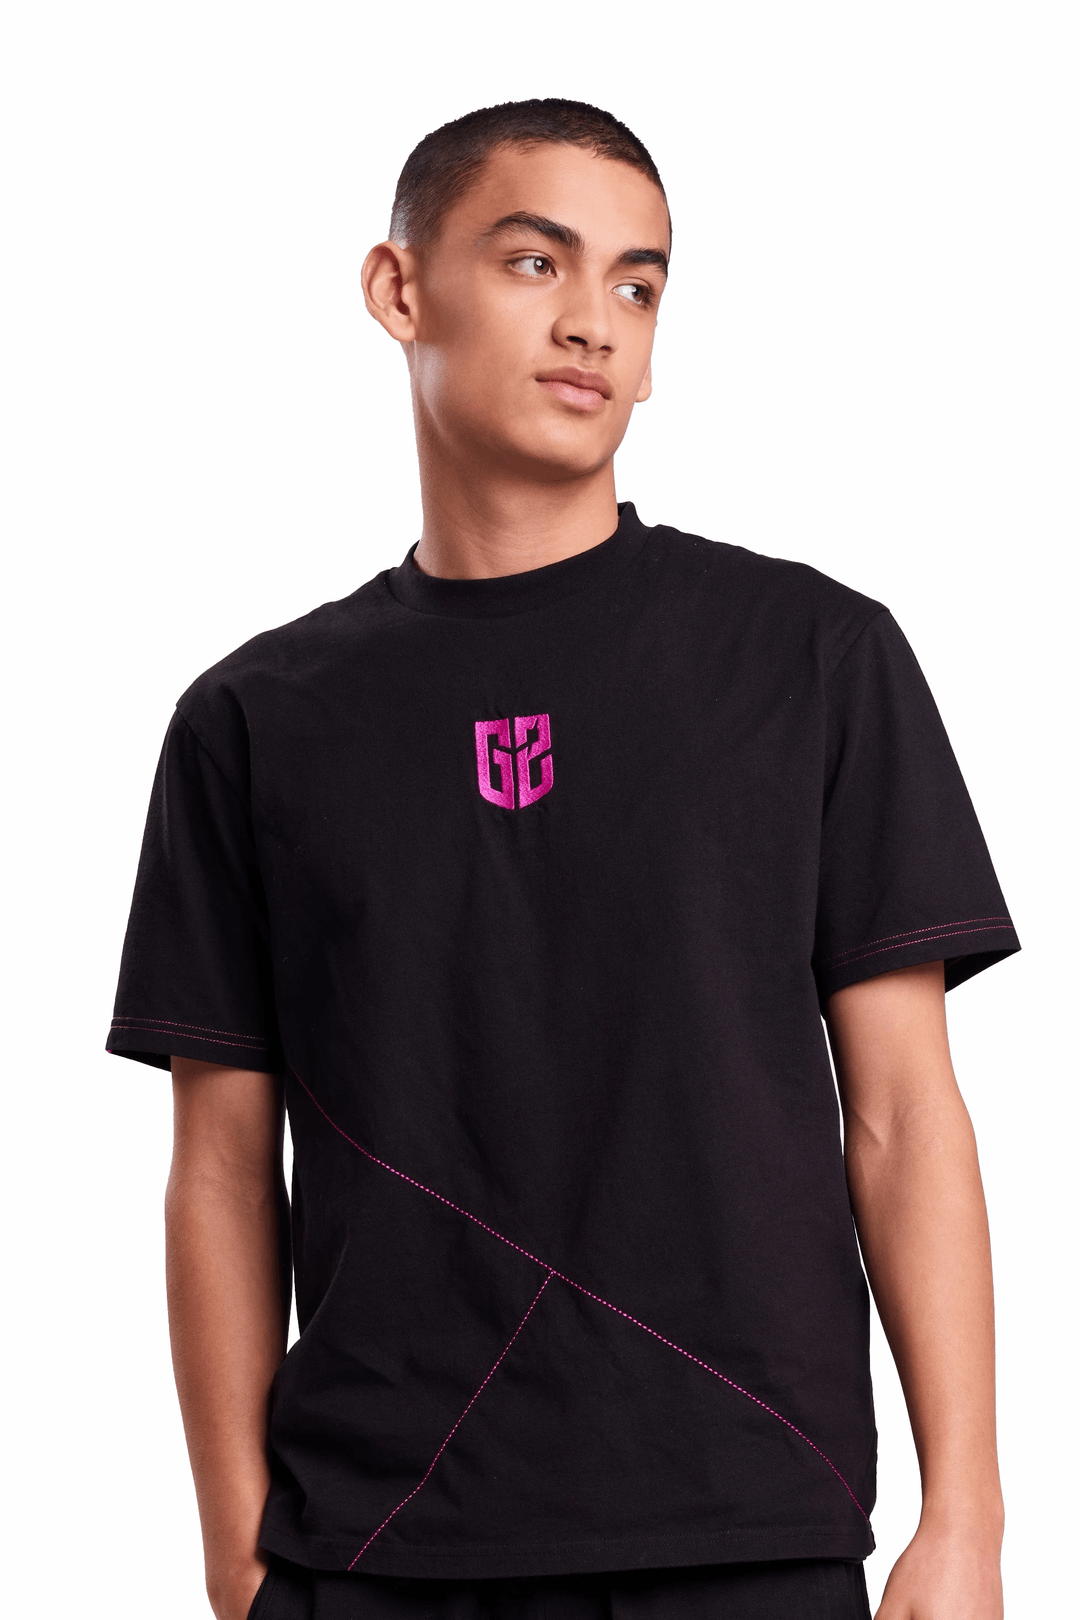 Summer G2 Esports Custom Fishing Shirts For Men, Women, And Kids 3D Print,  Oversized, Short Sleeve, LOL CSGO Essentials Tee From Hotouyodhgate, $8.45